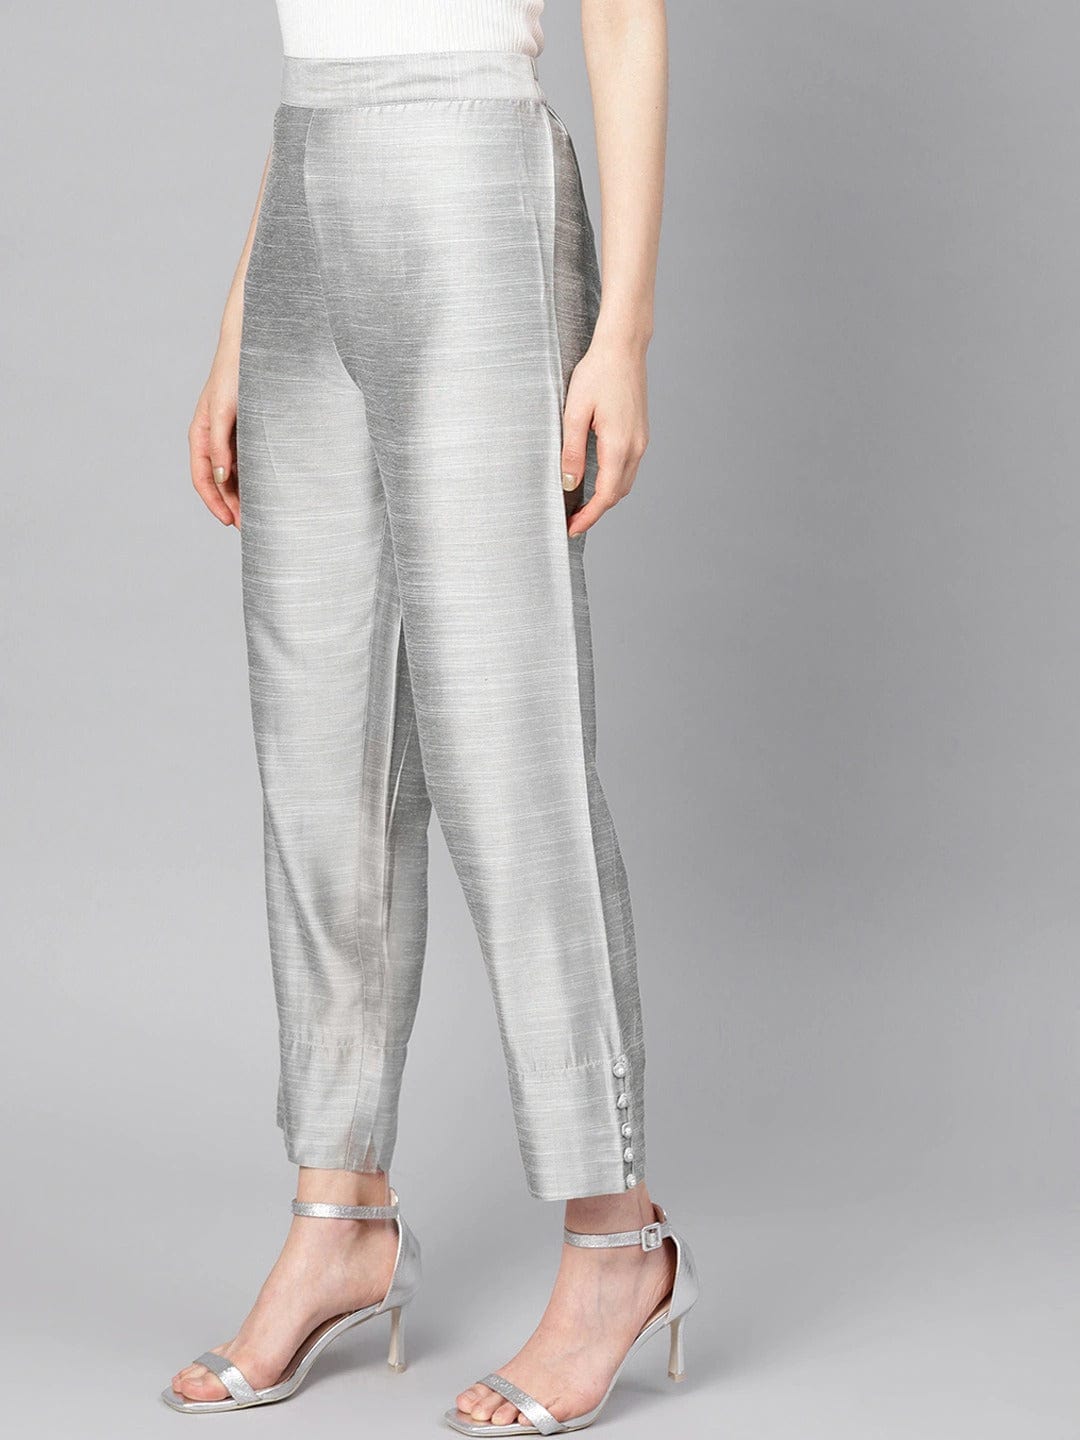 Missguided Gold Metallic Jacquard Cigarette Trousers 54  Missguided   Lookastic